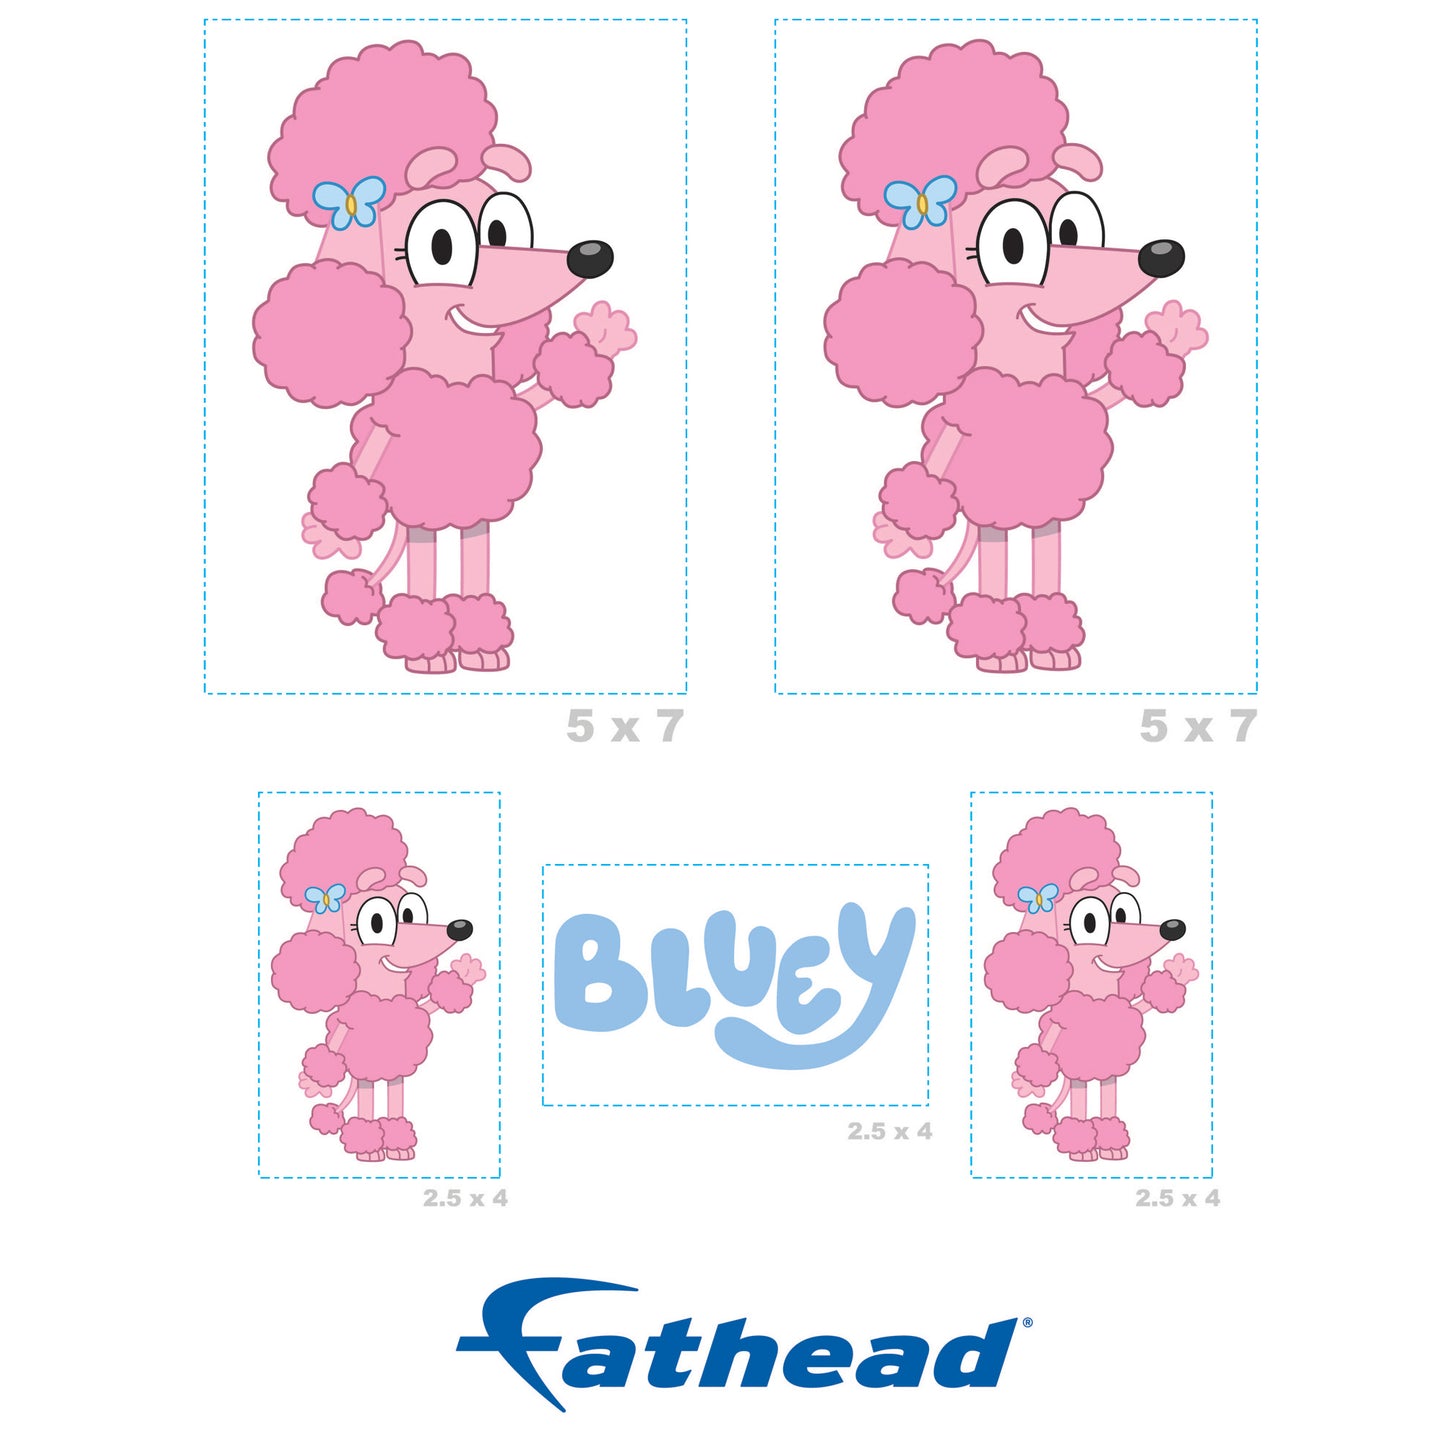 Bluey: Coco Minis - Officially Licensed BBC Removable Adhesive Decal